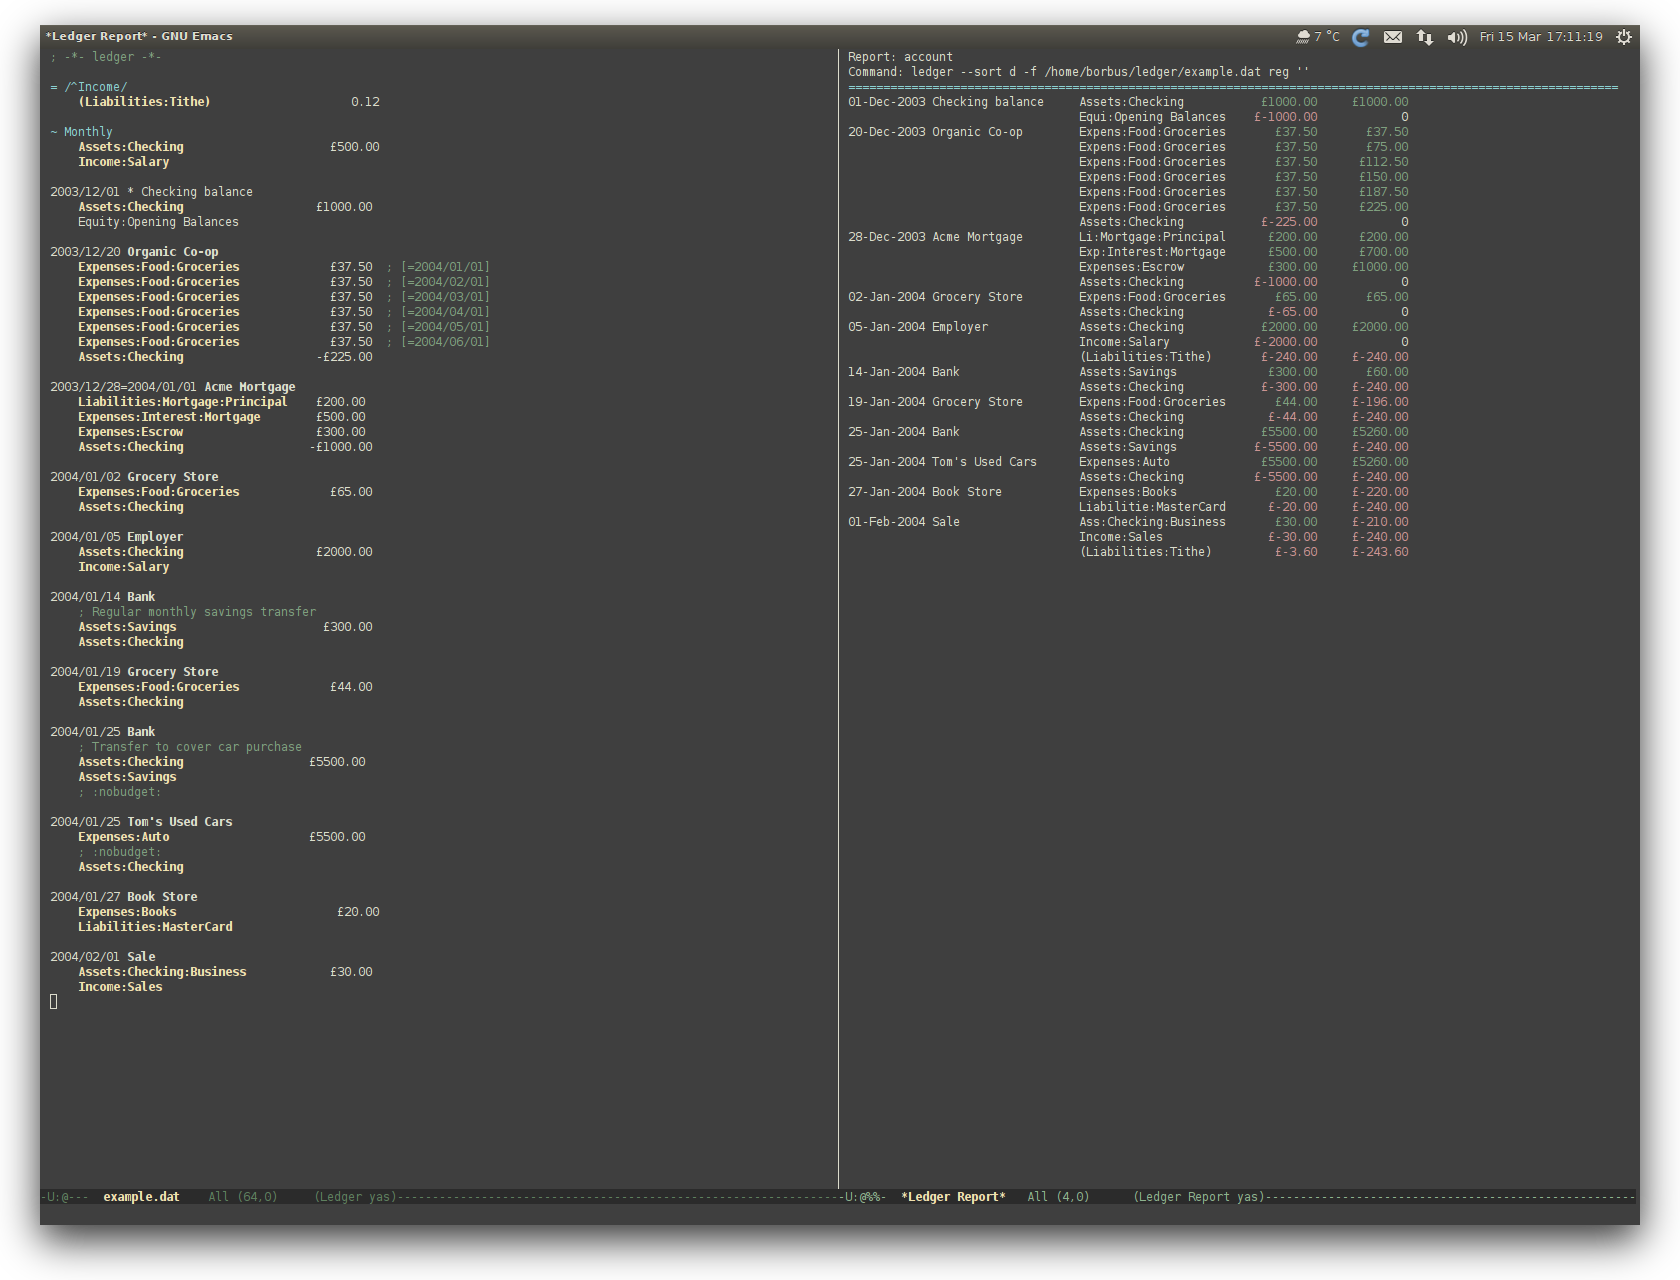 /TakeV/spacemacs/media/commit/21146f4fed970bf8e3acd41fafb7d451ac6d48ed/layers/finance/img/ledger.png